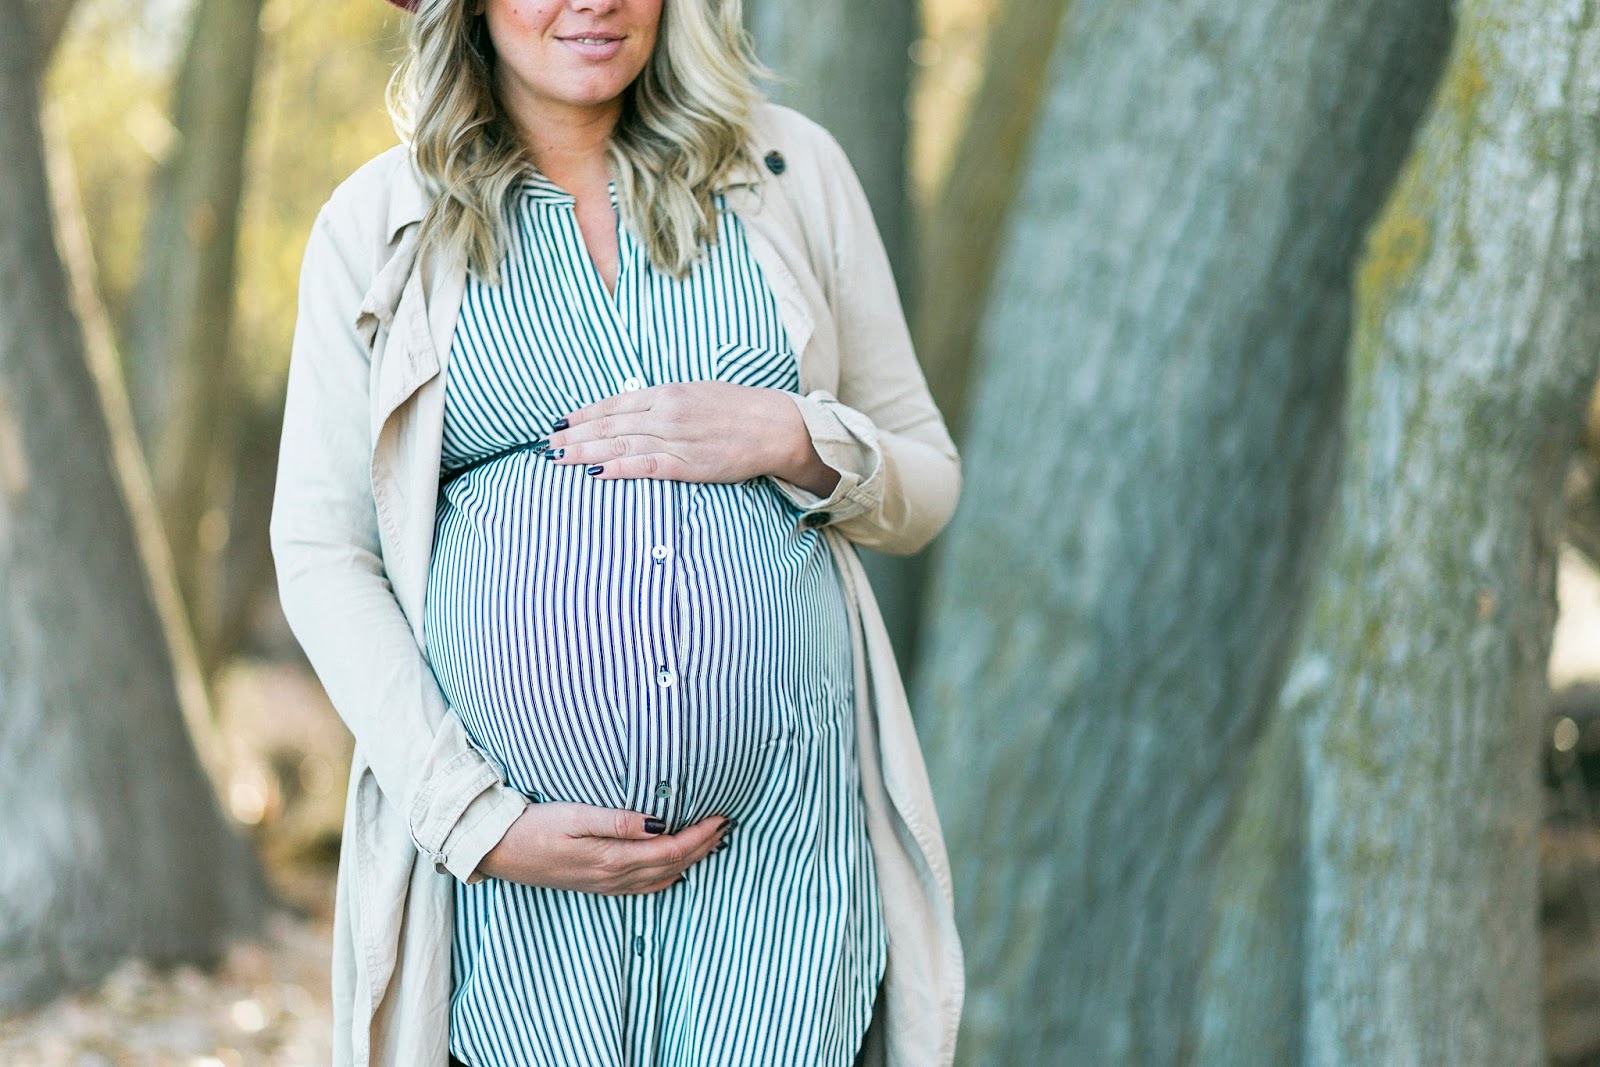 baby bump, maternity outfit, pregnant outfit